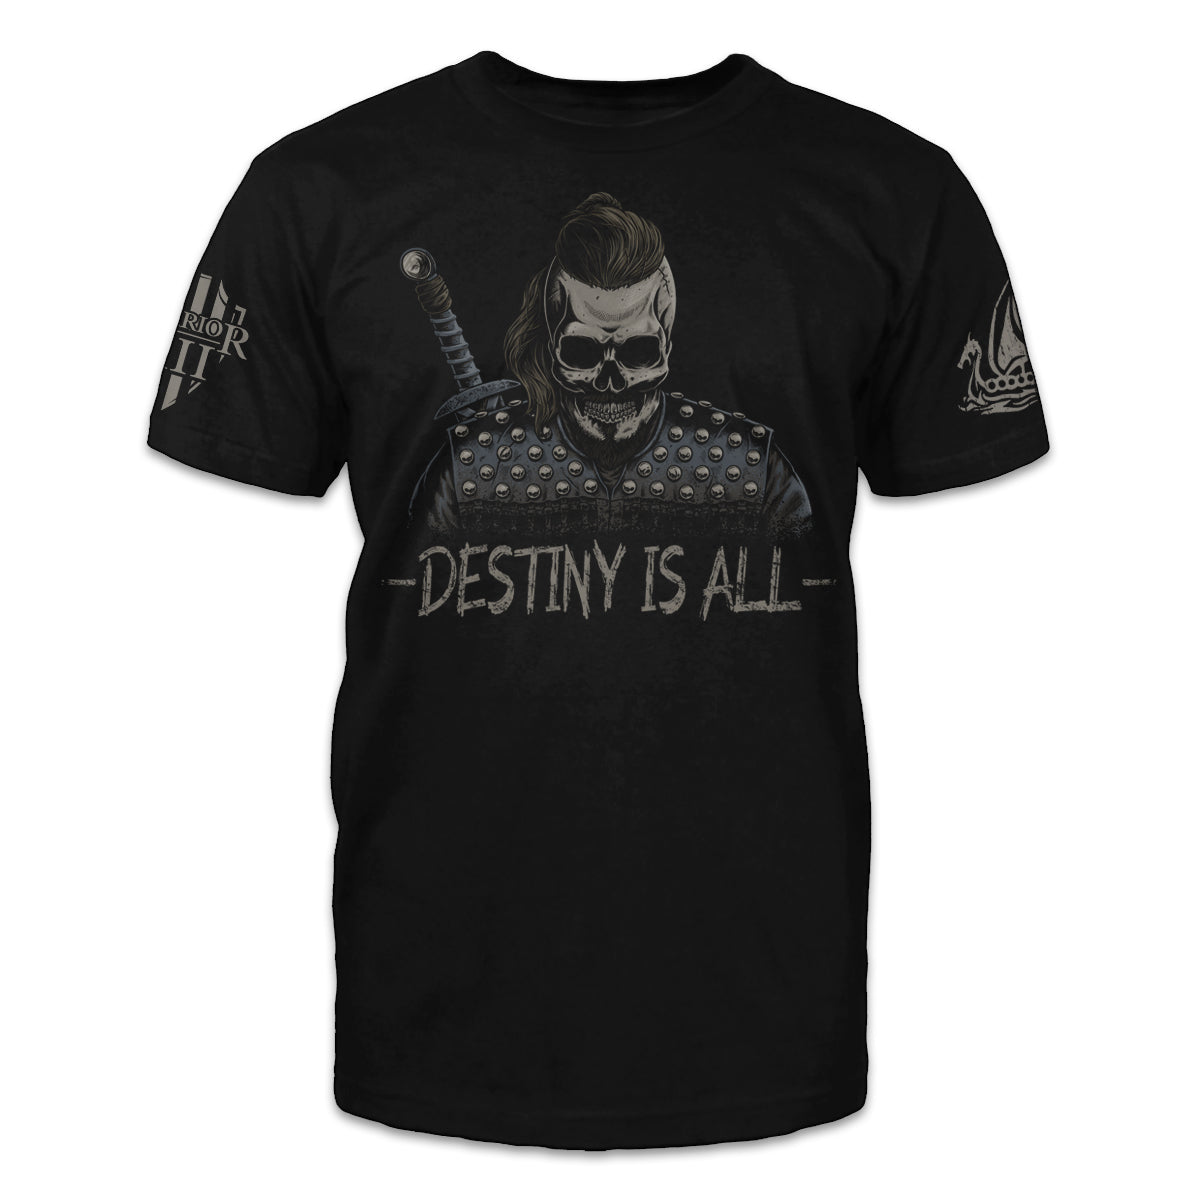 A black t-shirt with the words "Destiny Is All" and a warrior printed on the front